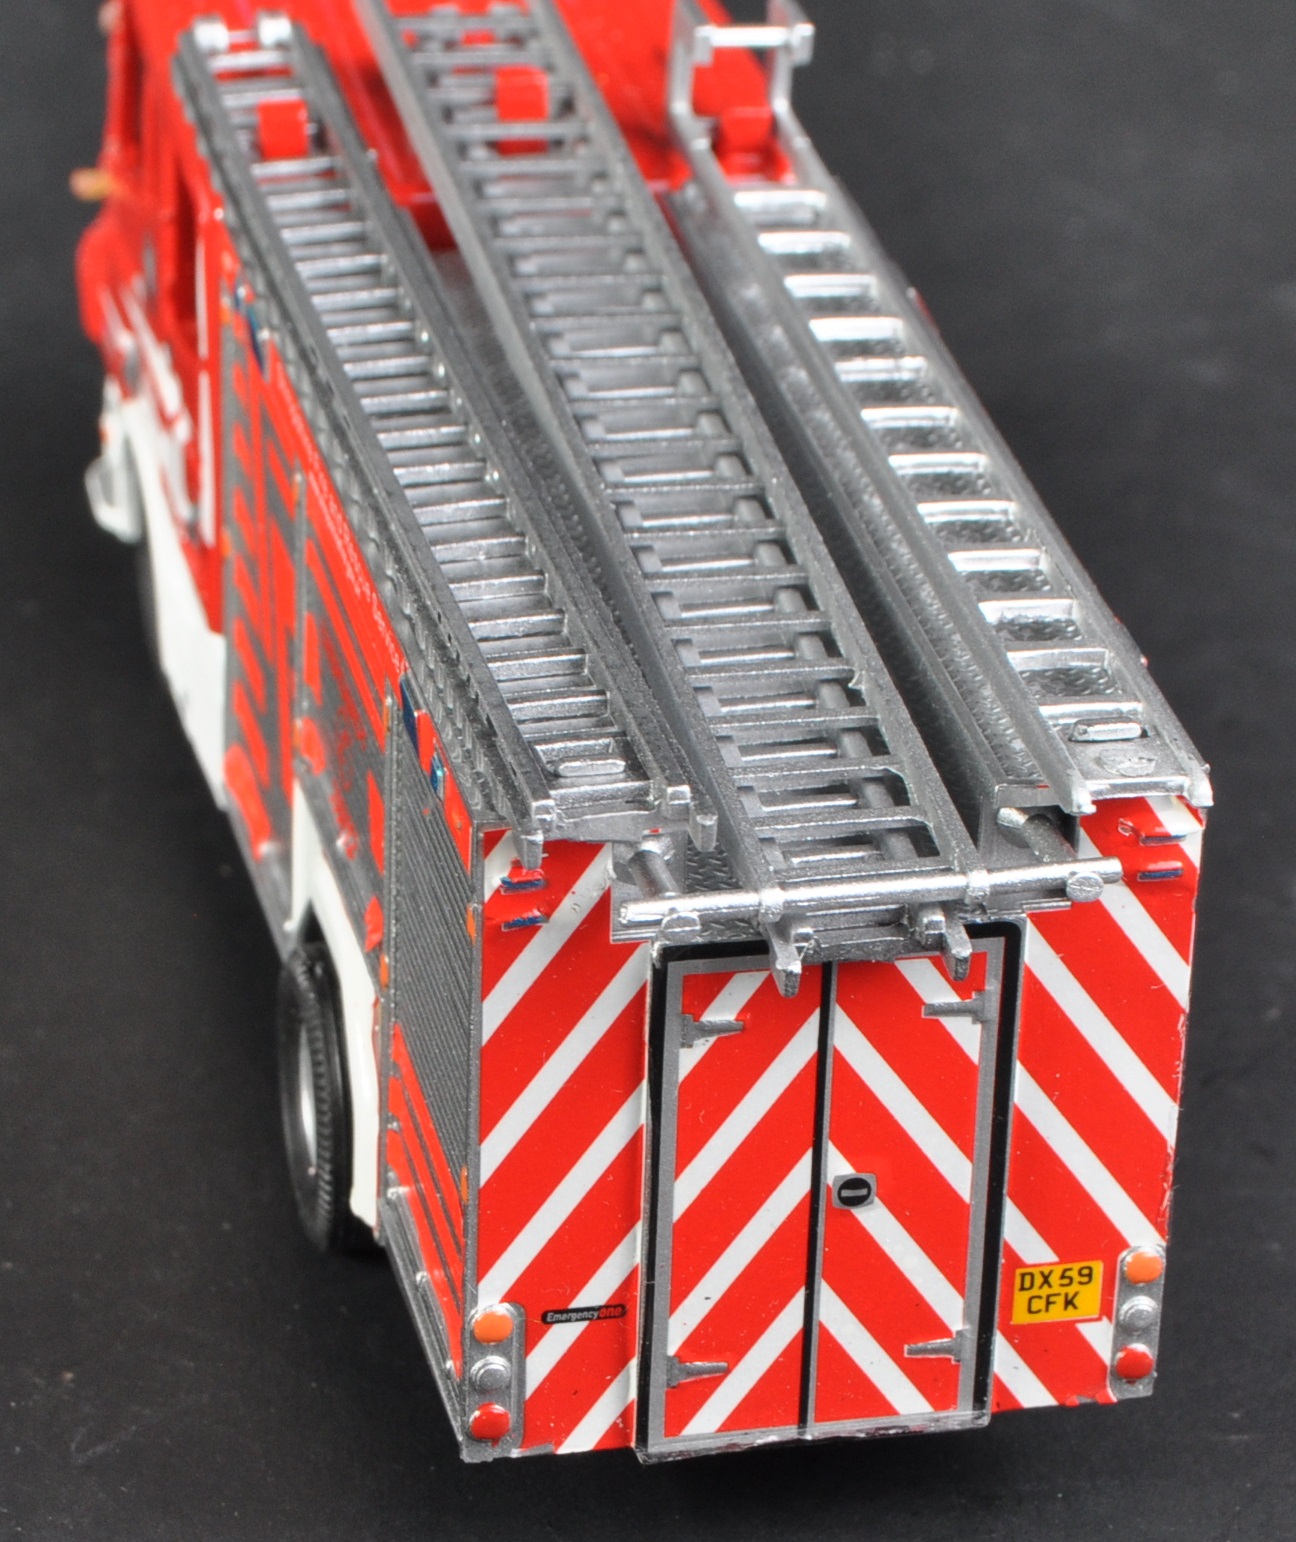 FIRE BRIGADE MODELS 1/50 SCALE DIECAST MODEL FIRE ENGINE - Image 5 of 6